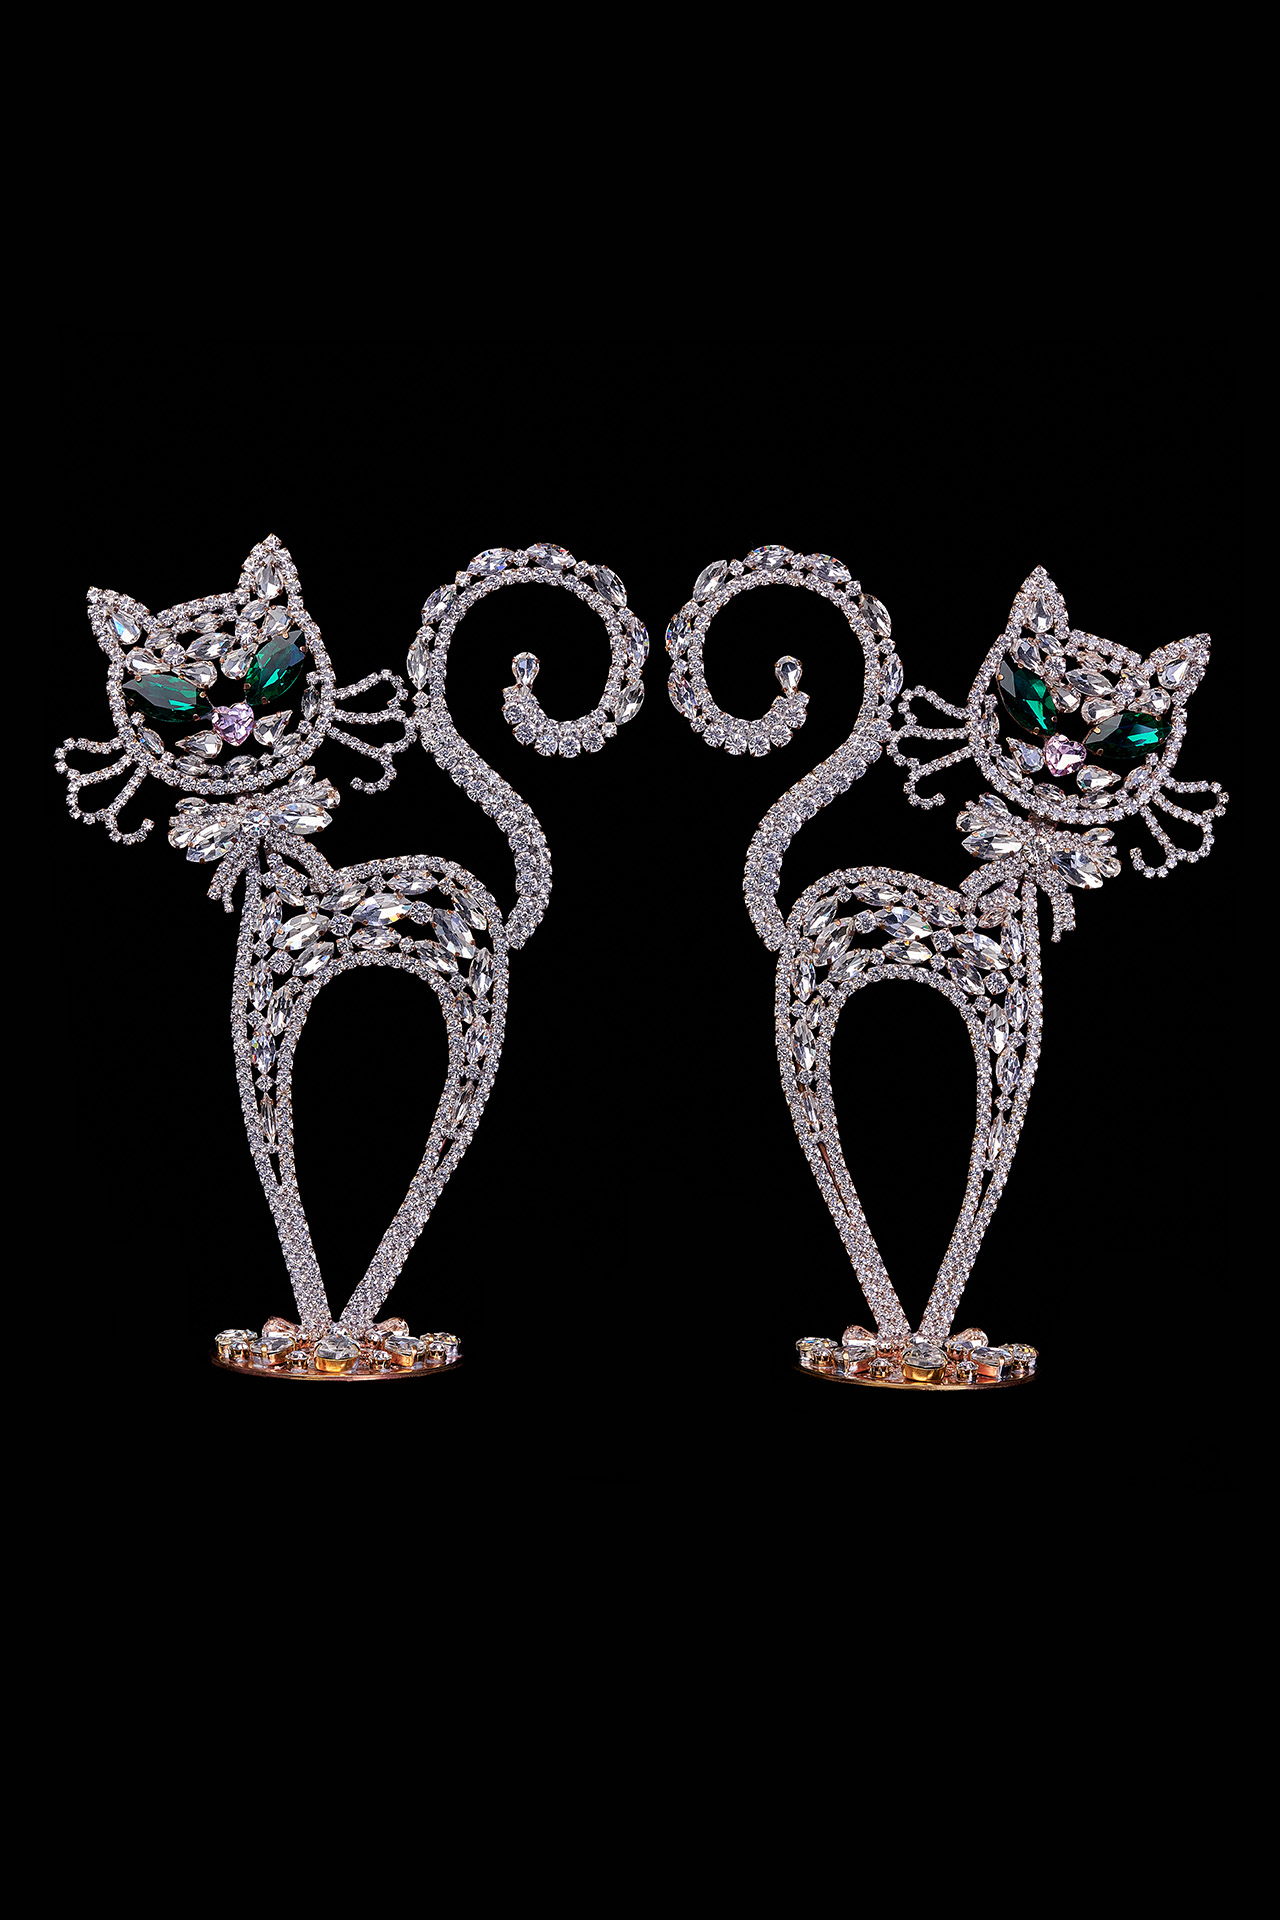 Rhinestones twin cats decoration handmade from clear crystals